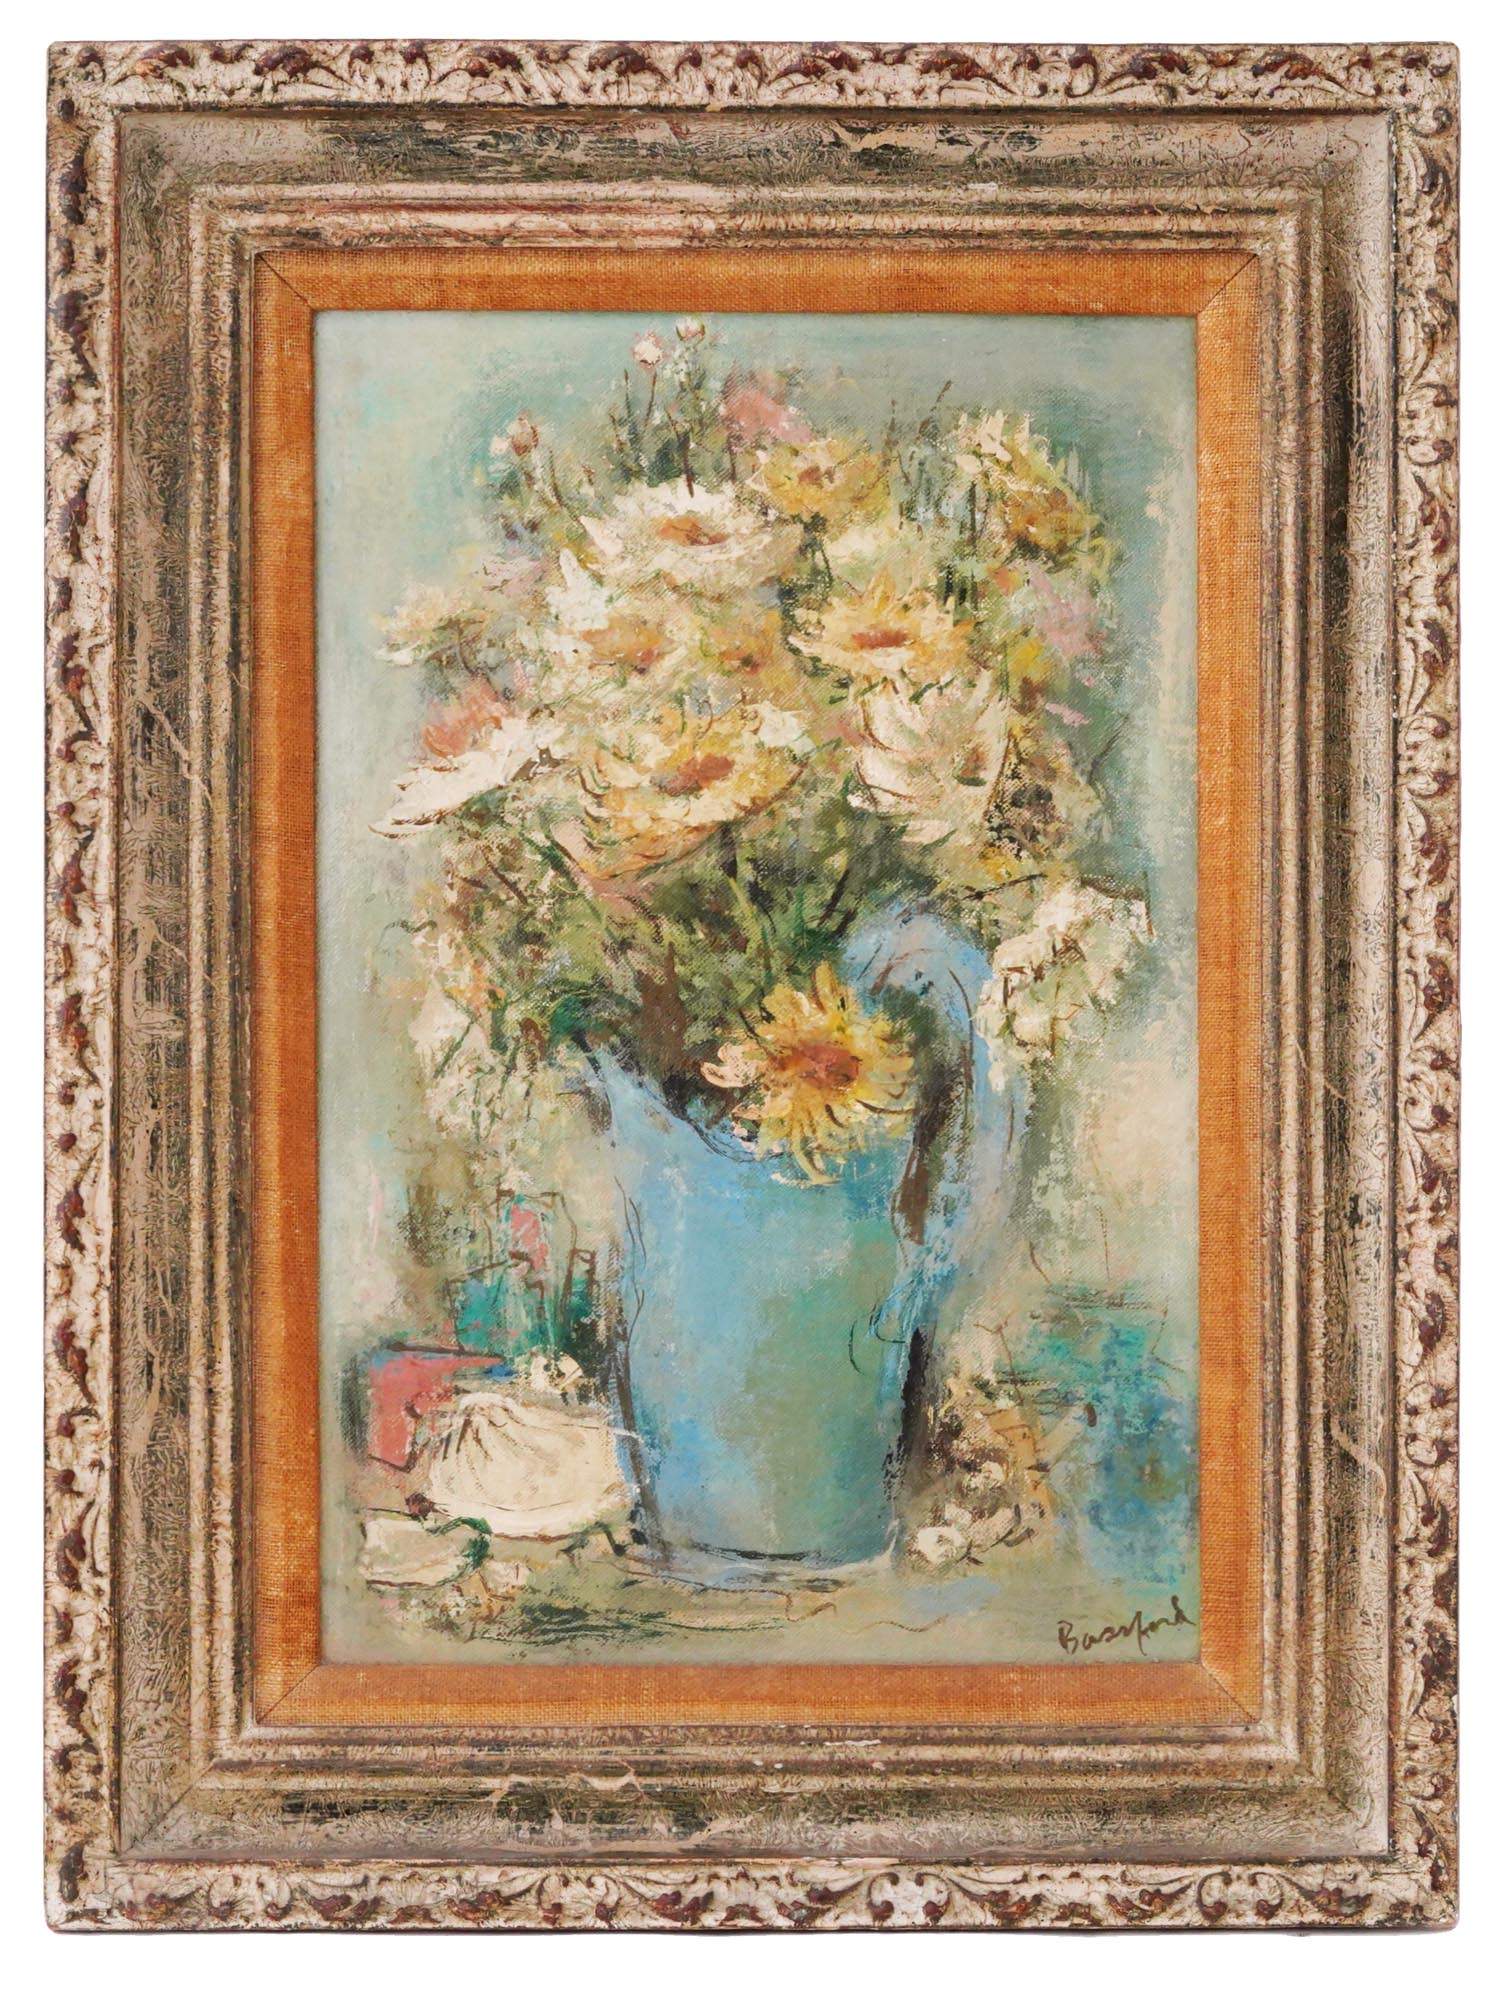 AMERICAN STILL LIFE PAINTING ATTR TO WALLACE BASSFORD PIC-0